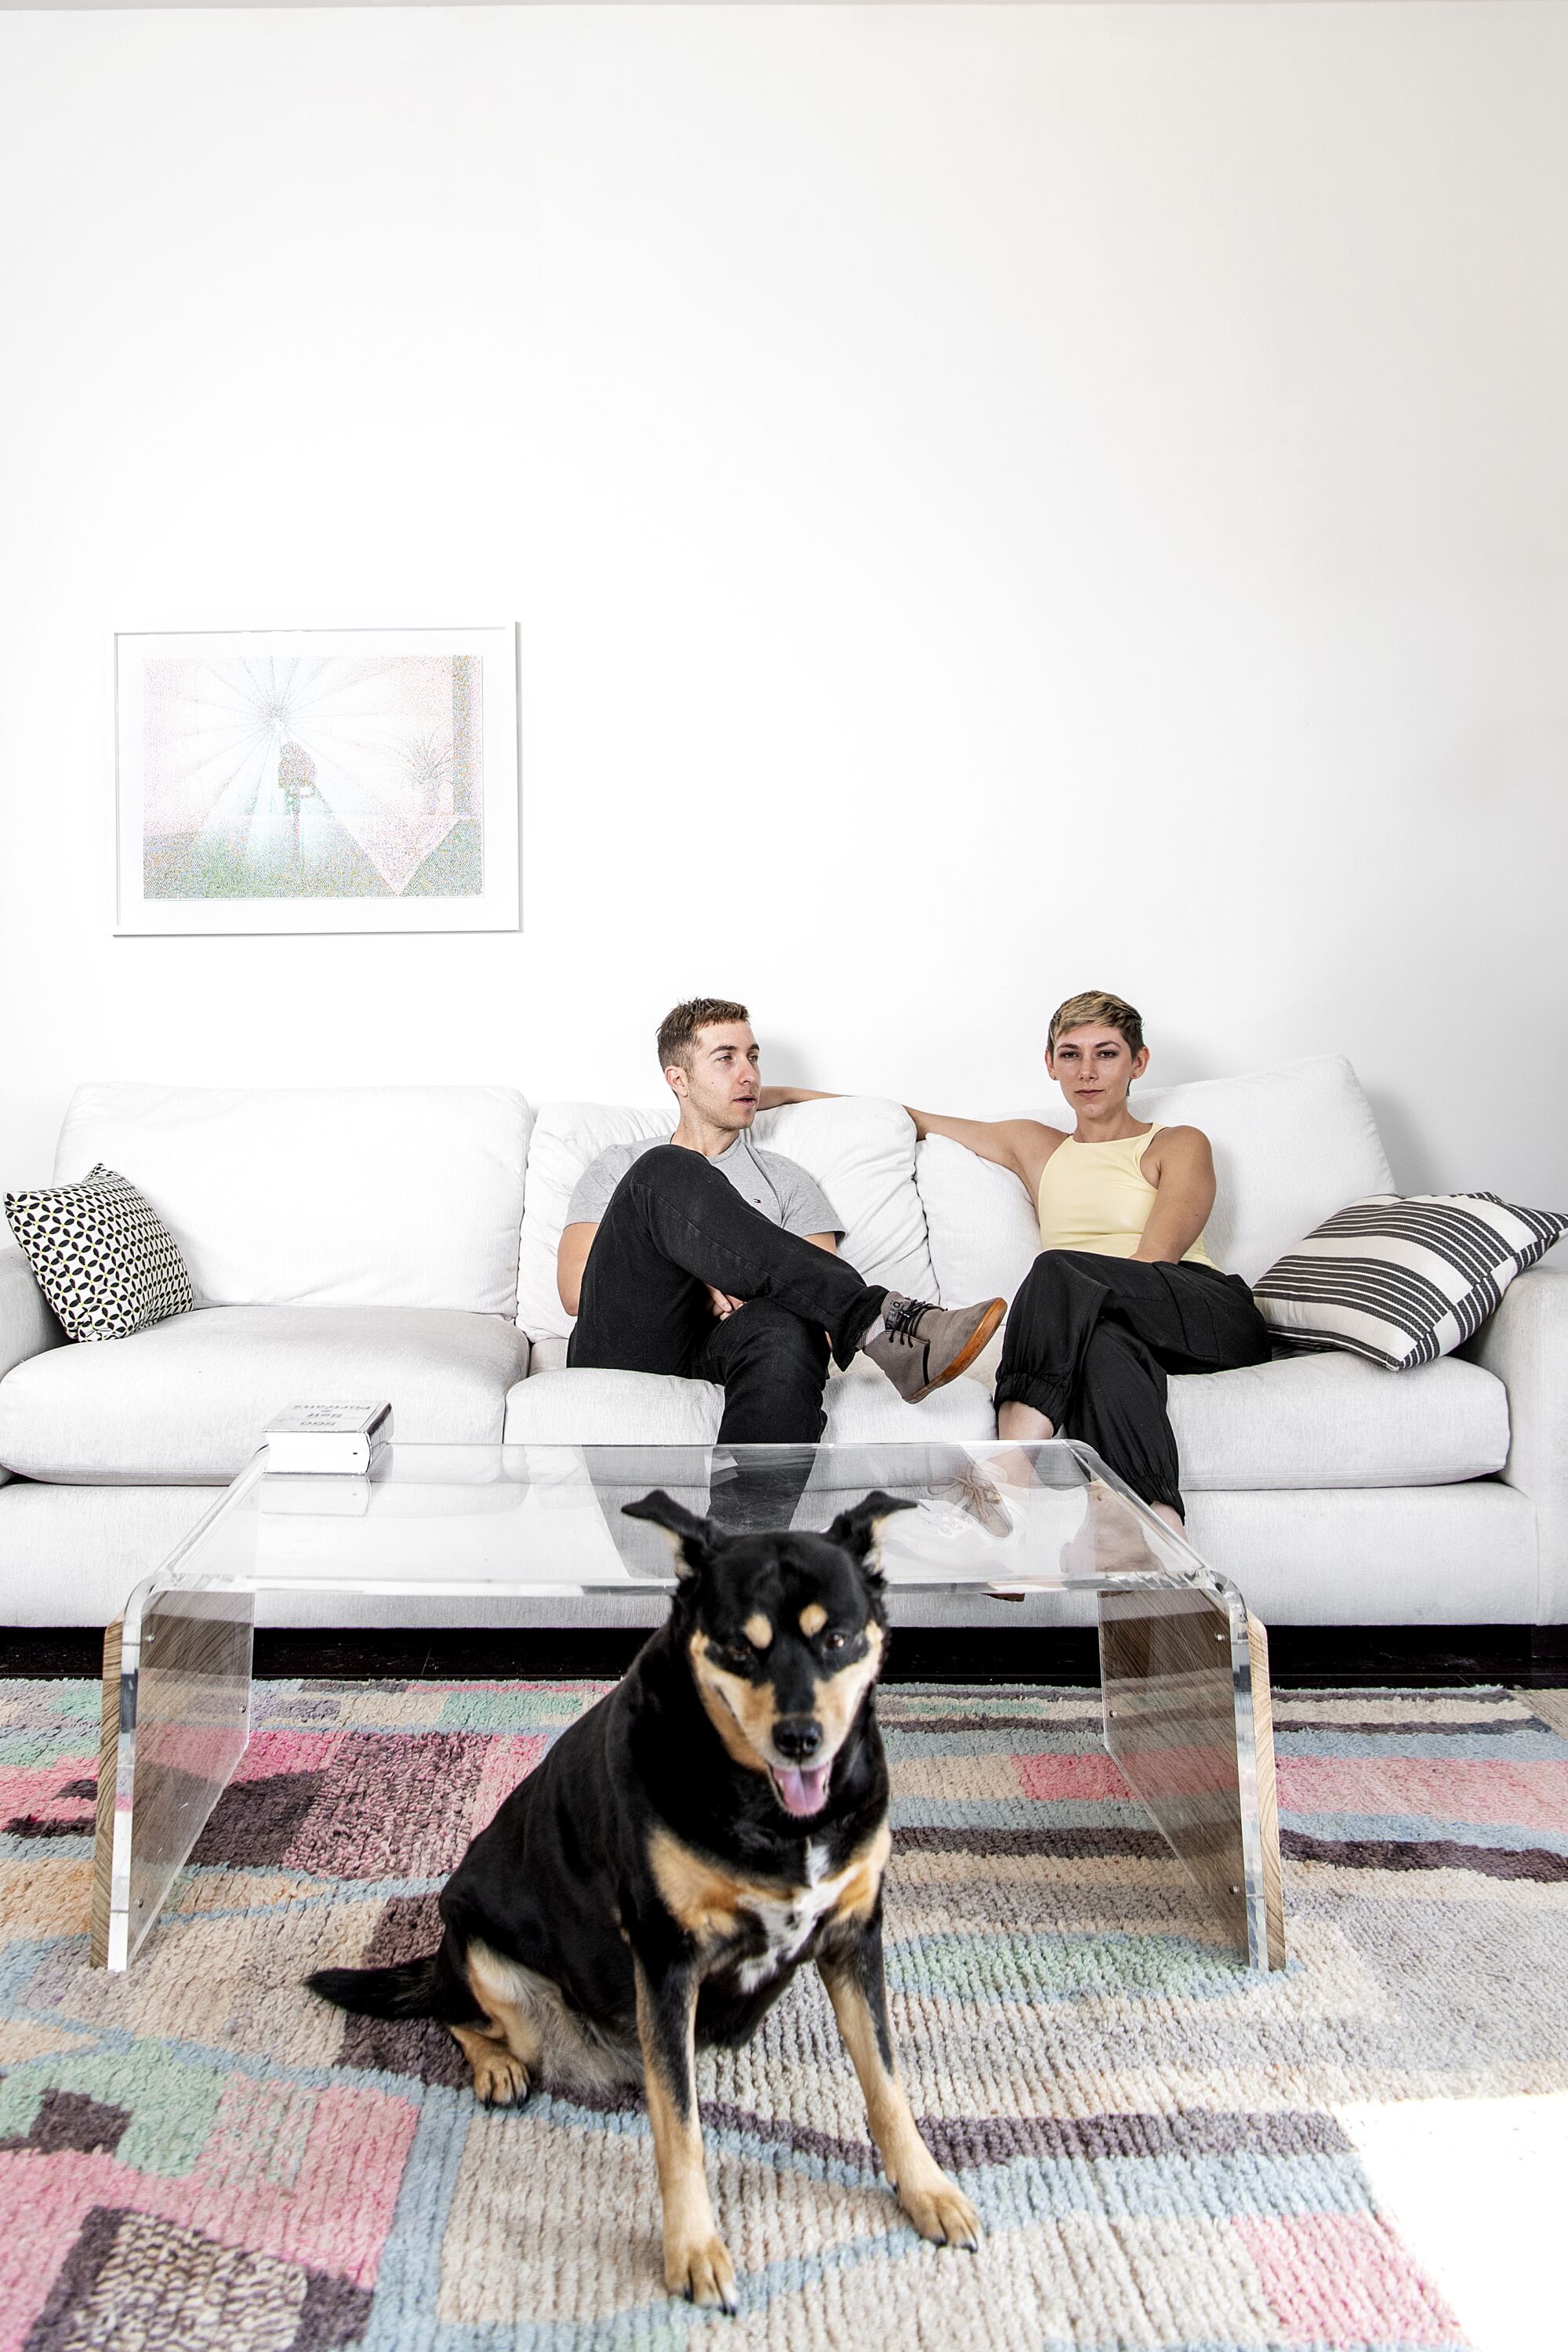 A couple poses on a white couch, with their dog in the forefront.